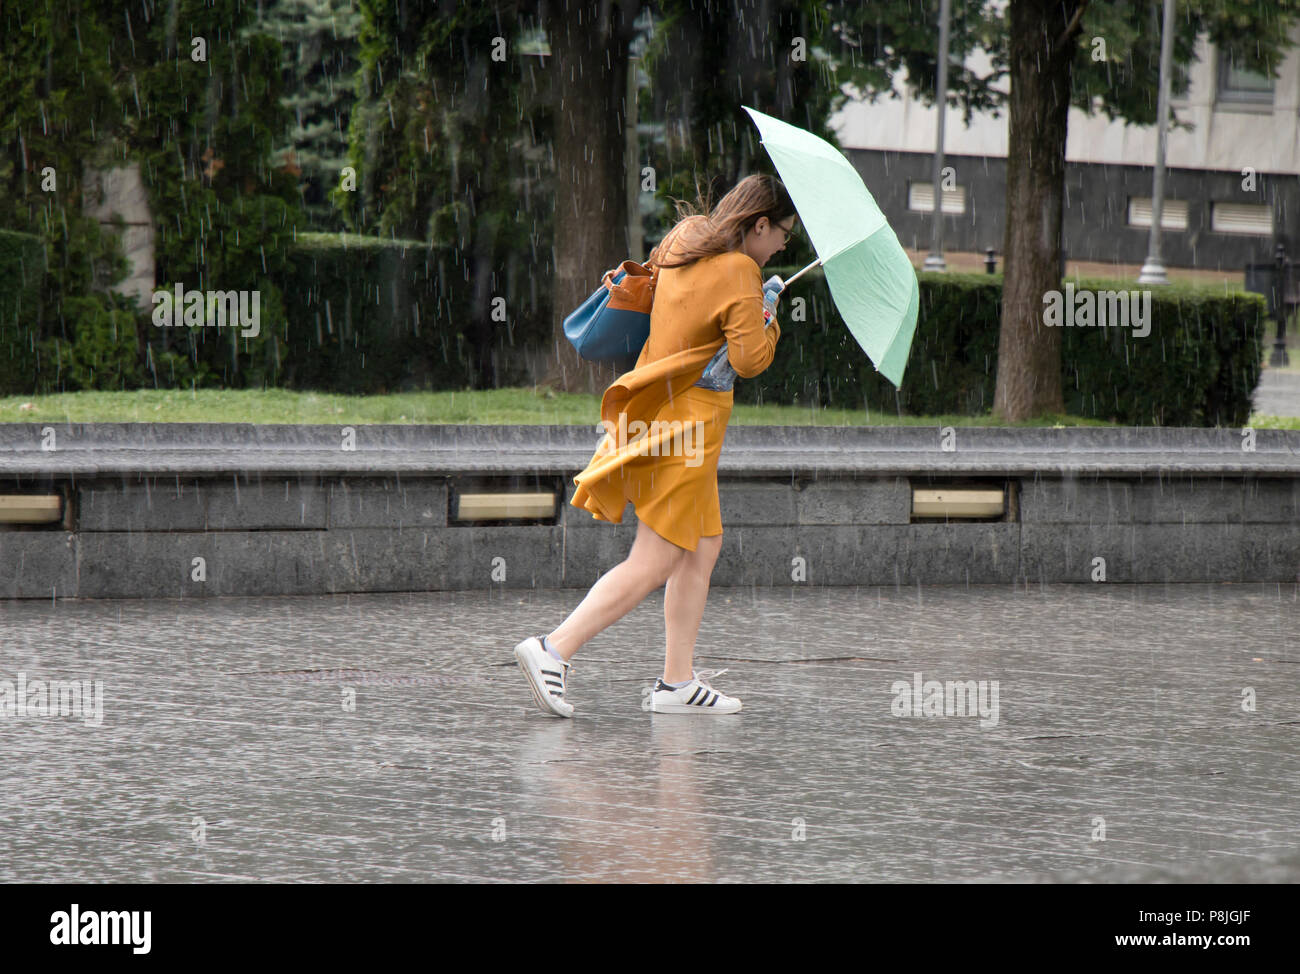 Belgrade, Serbia - June 14, 2018: One young woman running under umbrella in the sudden  heavy spring windy rain in the city park , holding a bottle of Stock Photo